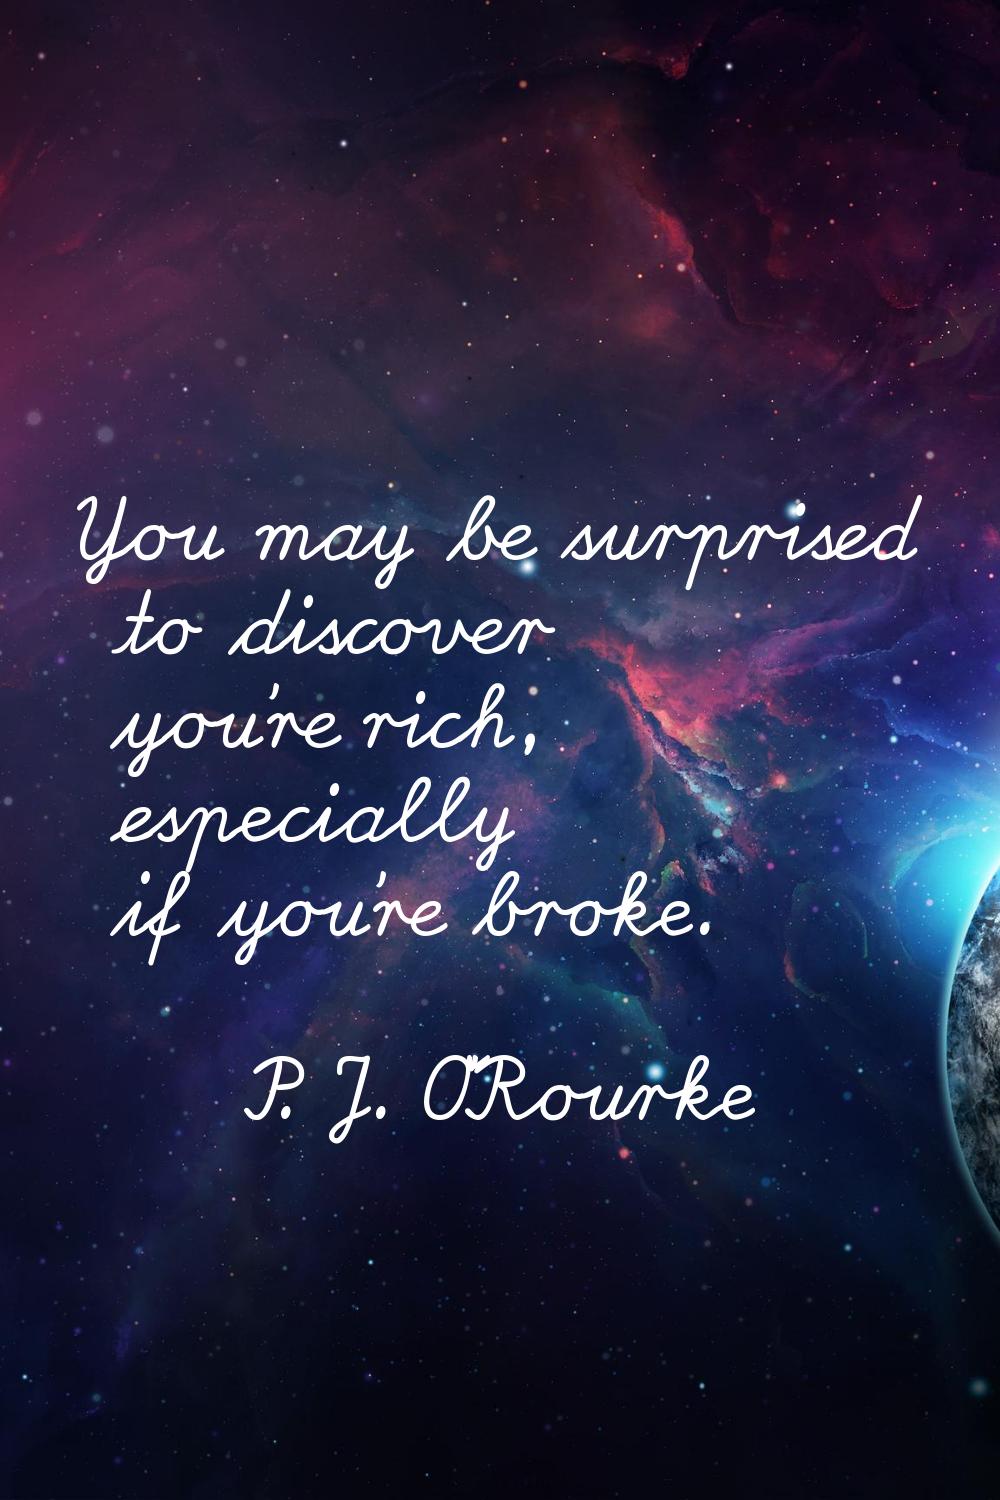 You may be surprised to discover you're rich, especially if you're broke.